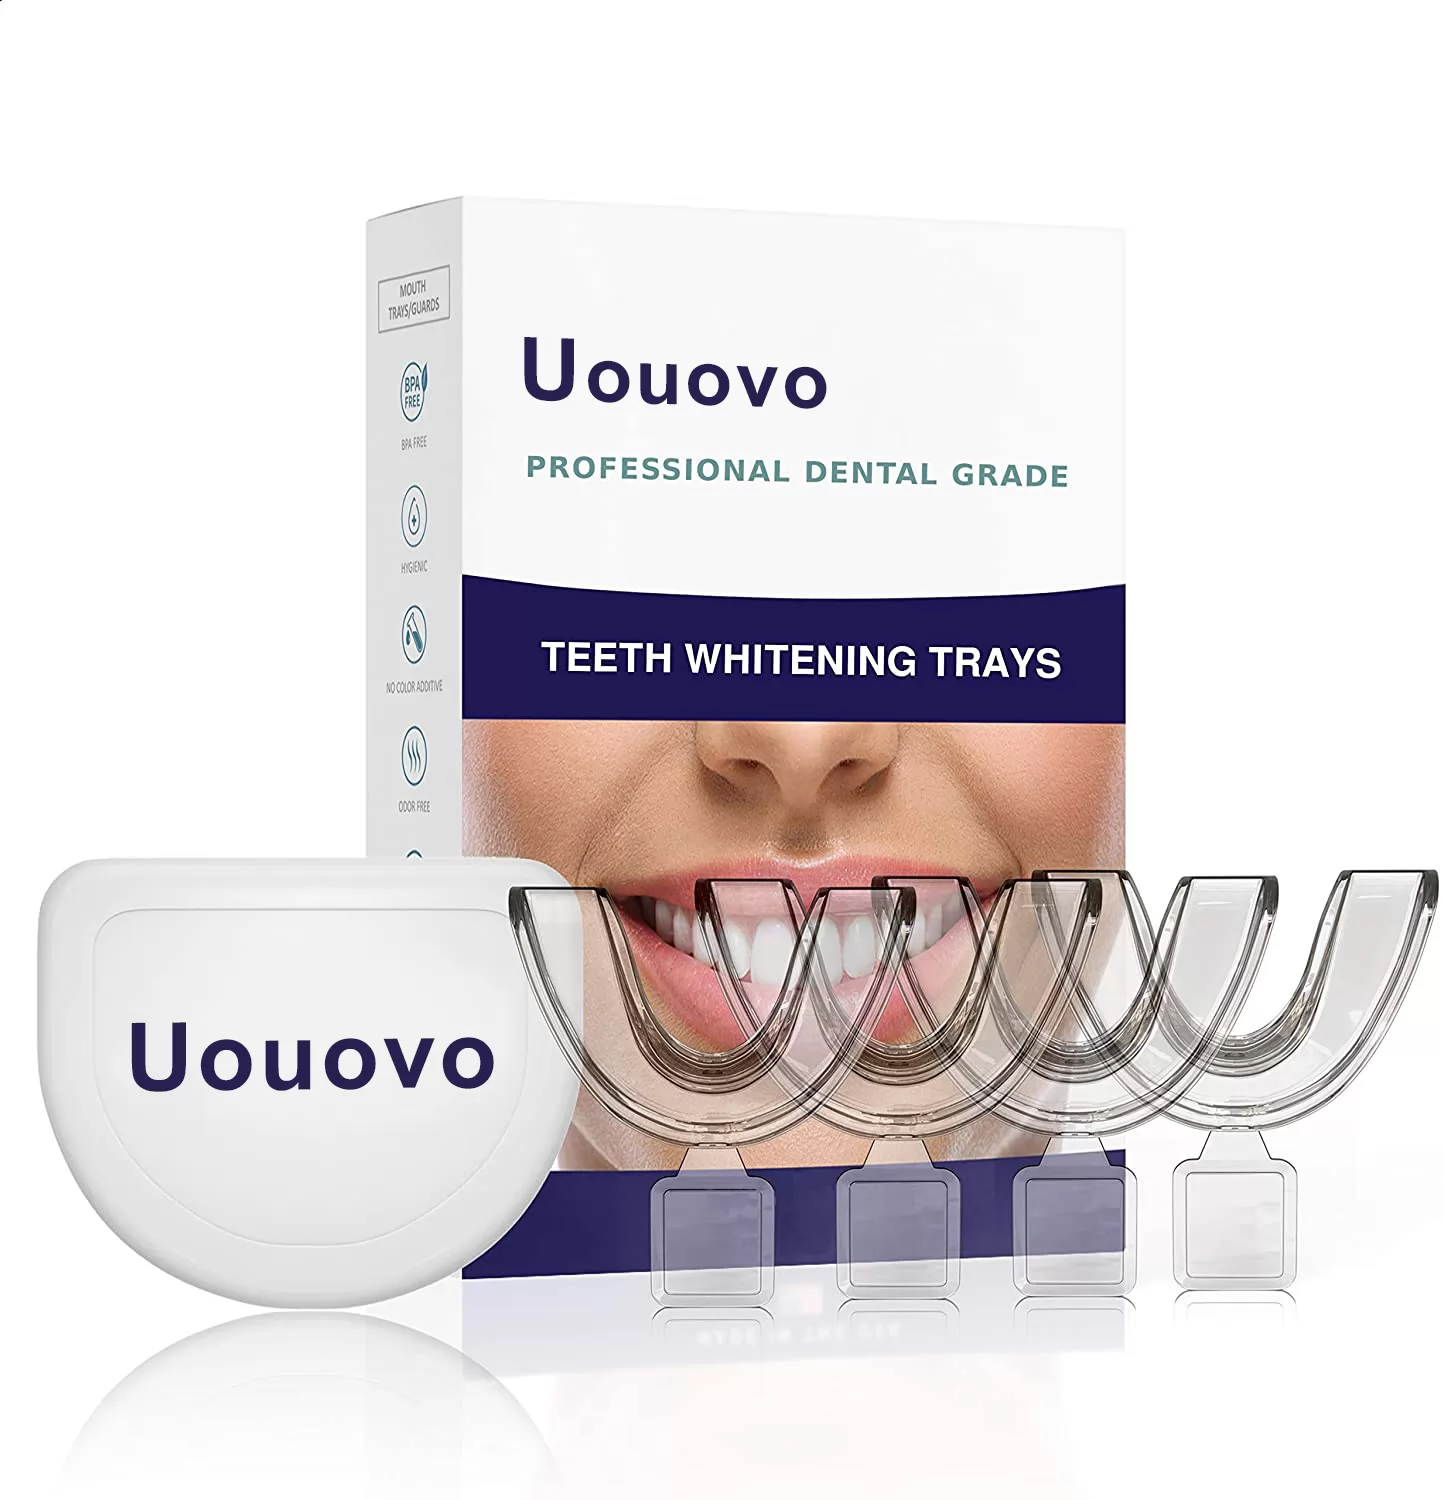 Uouovo Teeth Whitening Trays - Moldable, Trimmable, Custom Fit, Comfortable - (4) Mouth Trays, Hygienic Case – Easy to Mold, Mouth Tray for Tooth Whit